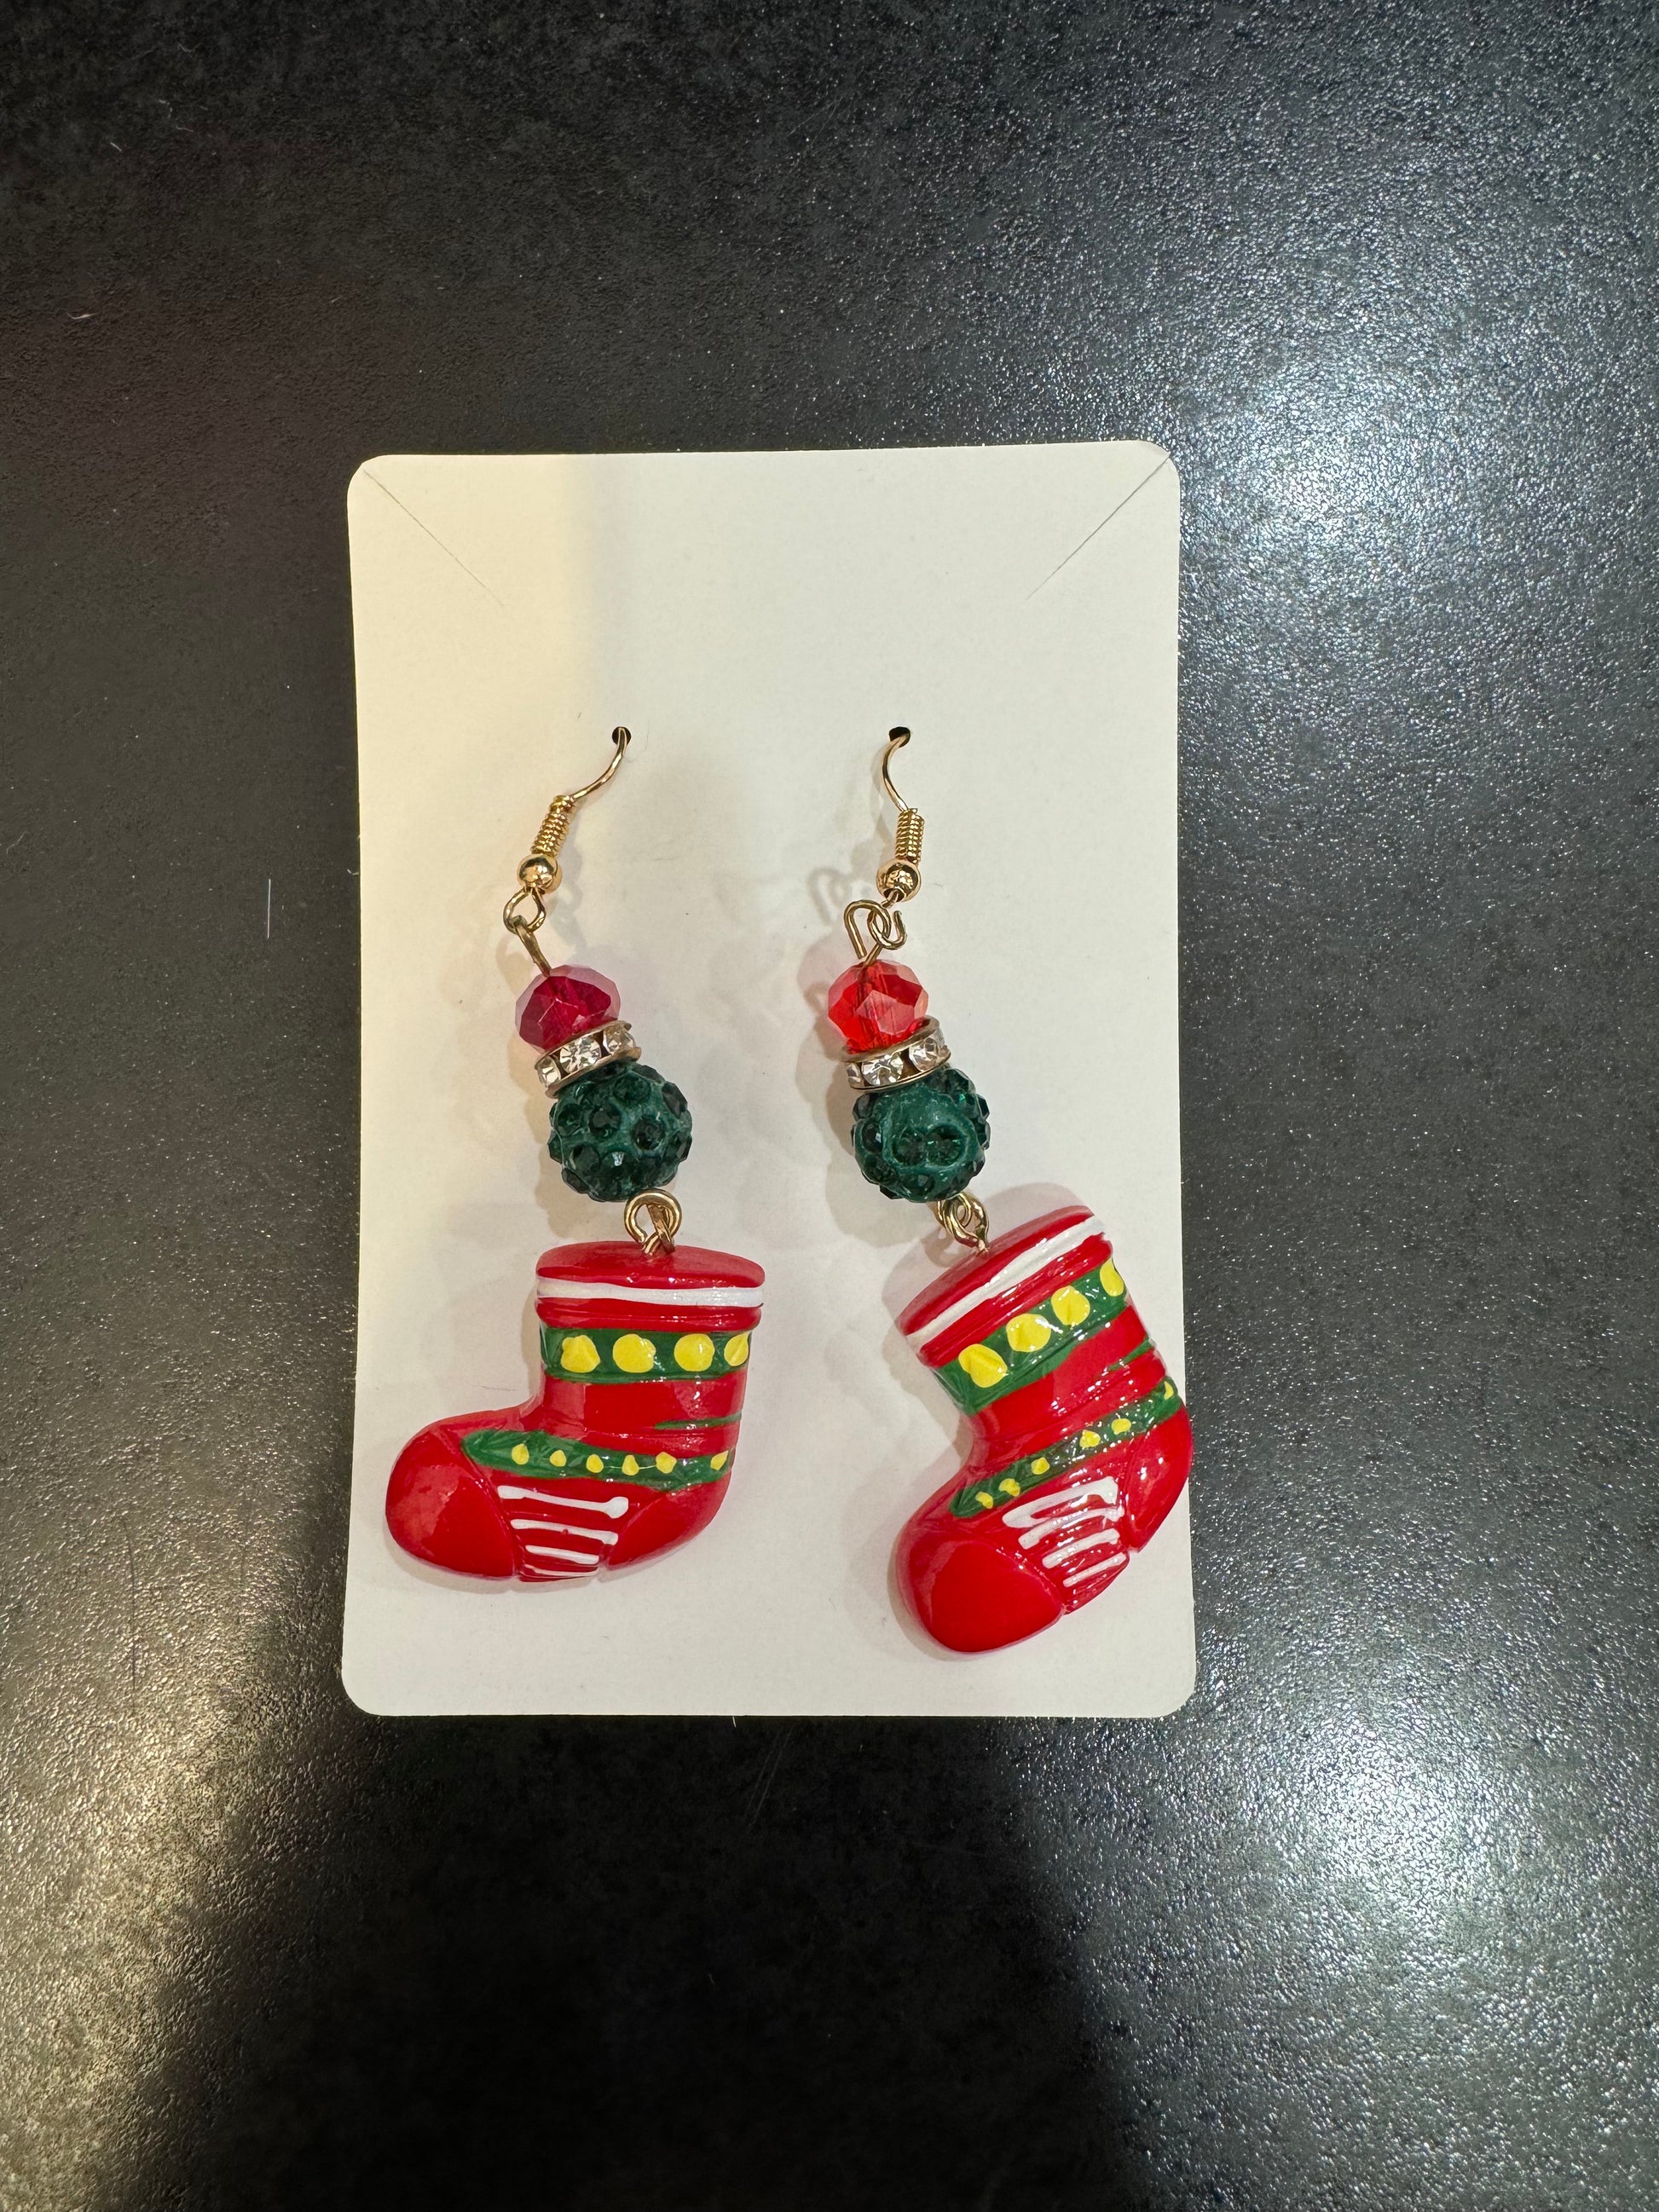 A pair of red and green Chickie Collective Stocking Earrings.